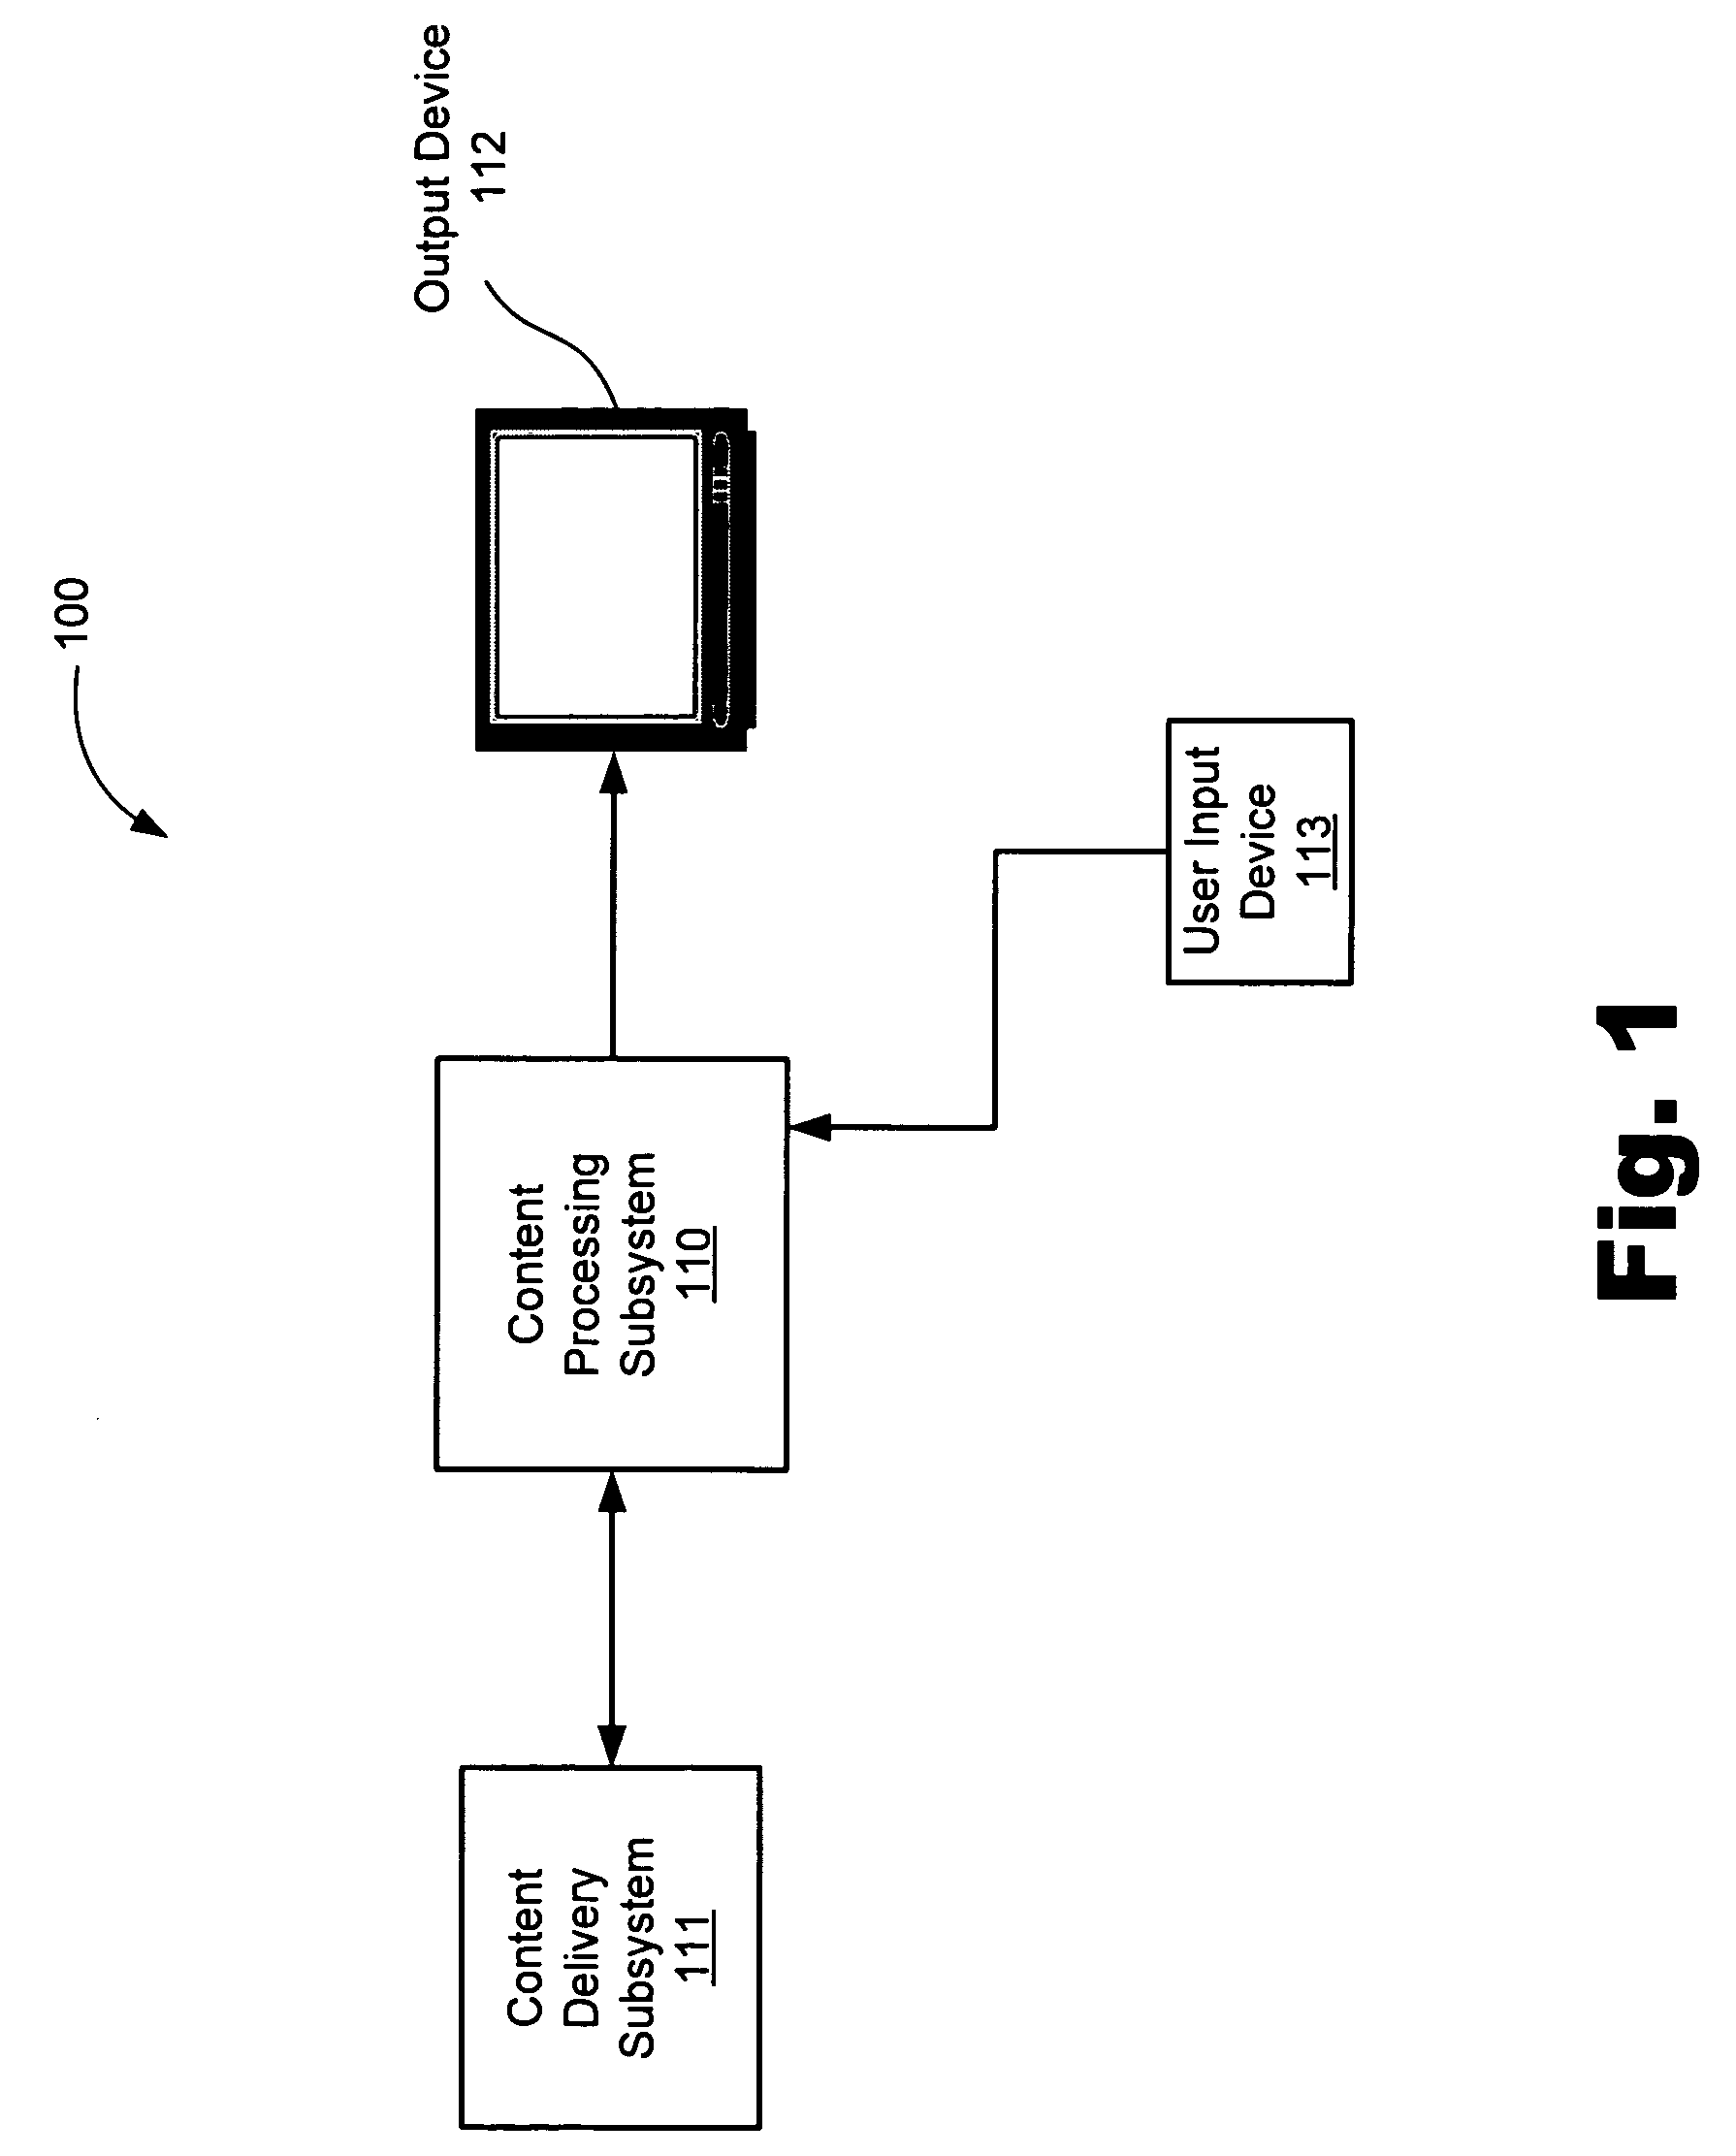 Interactive content for media content access systems and methods